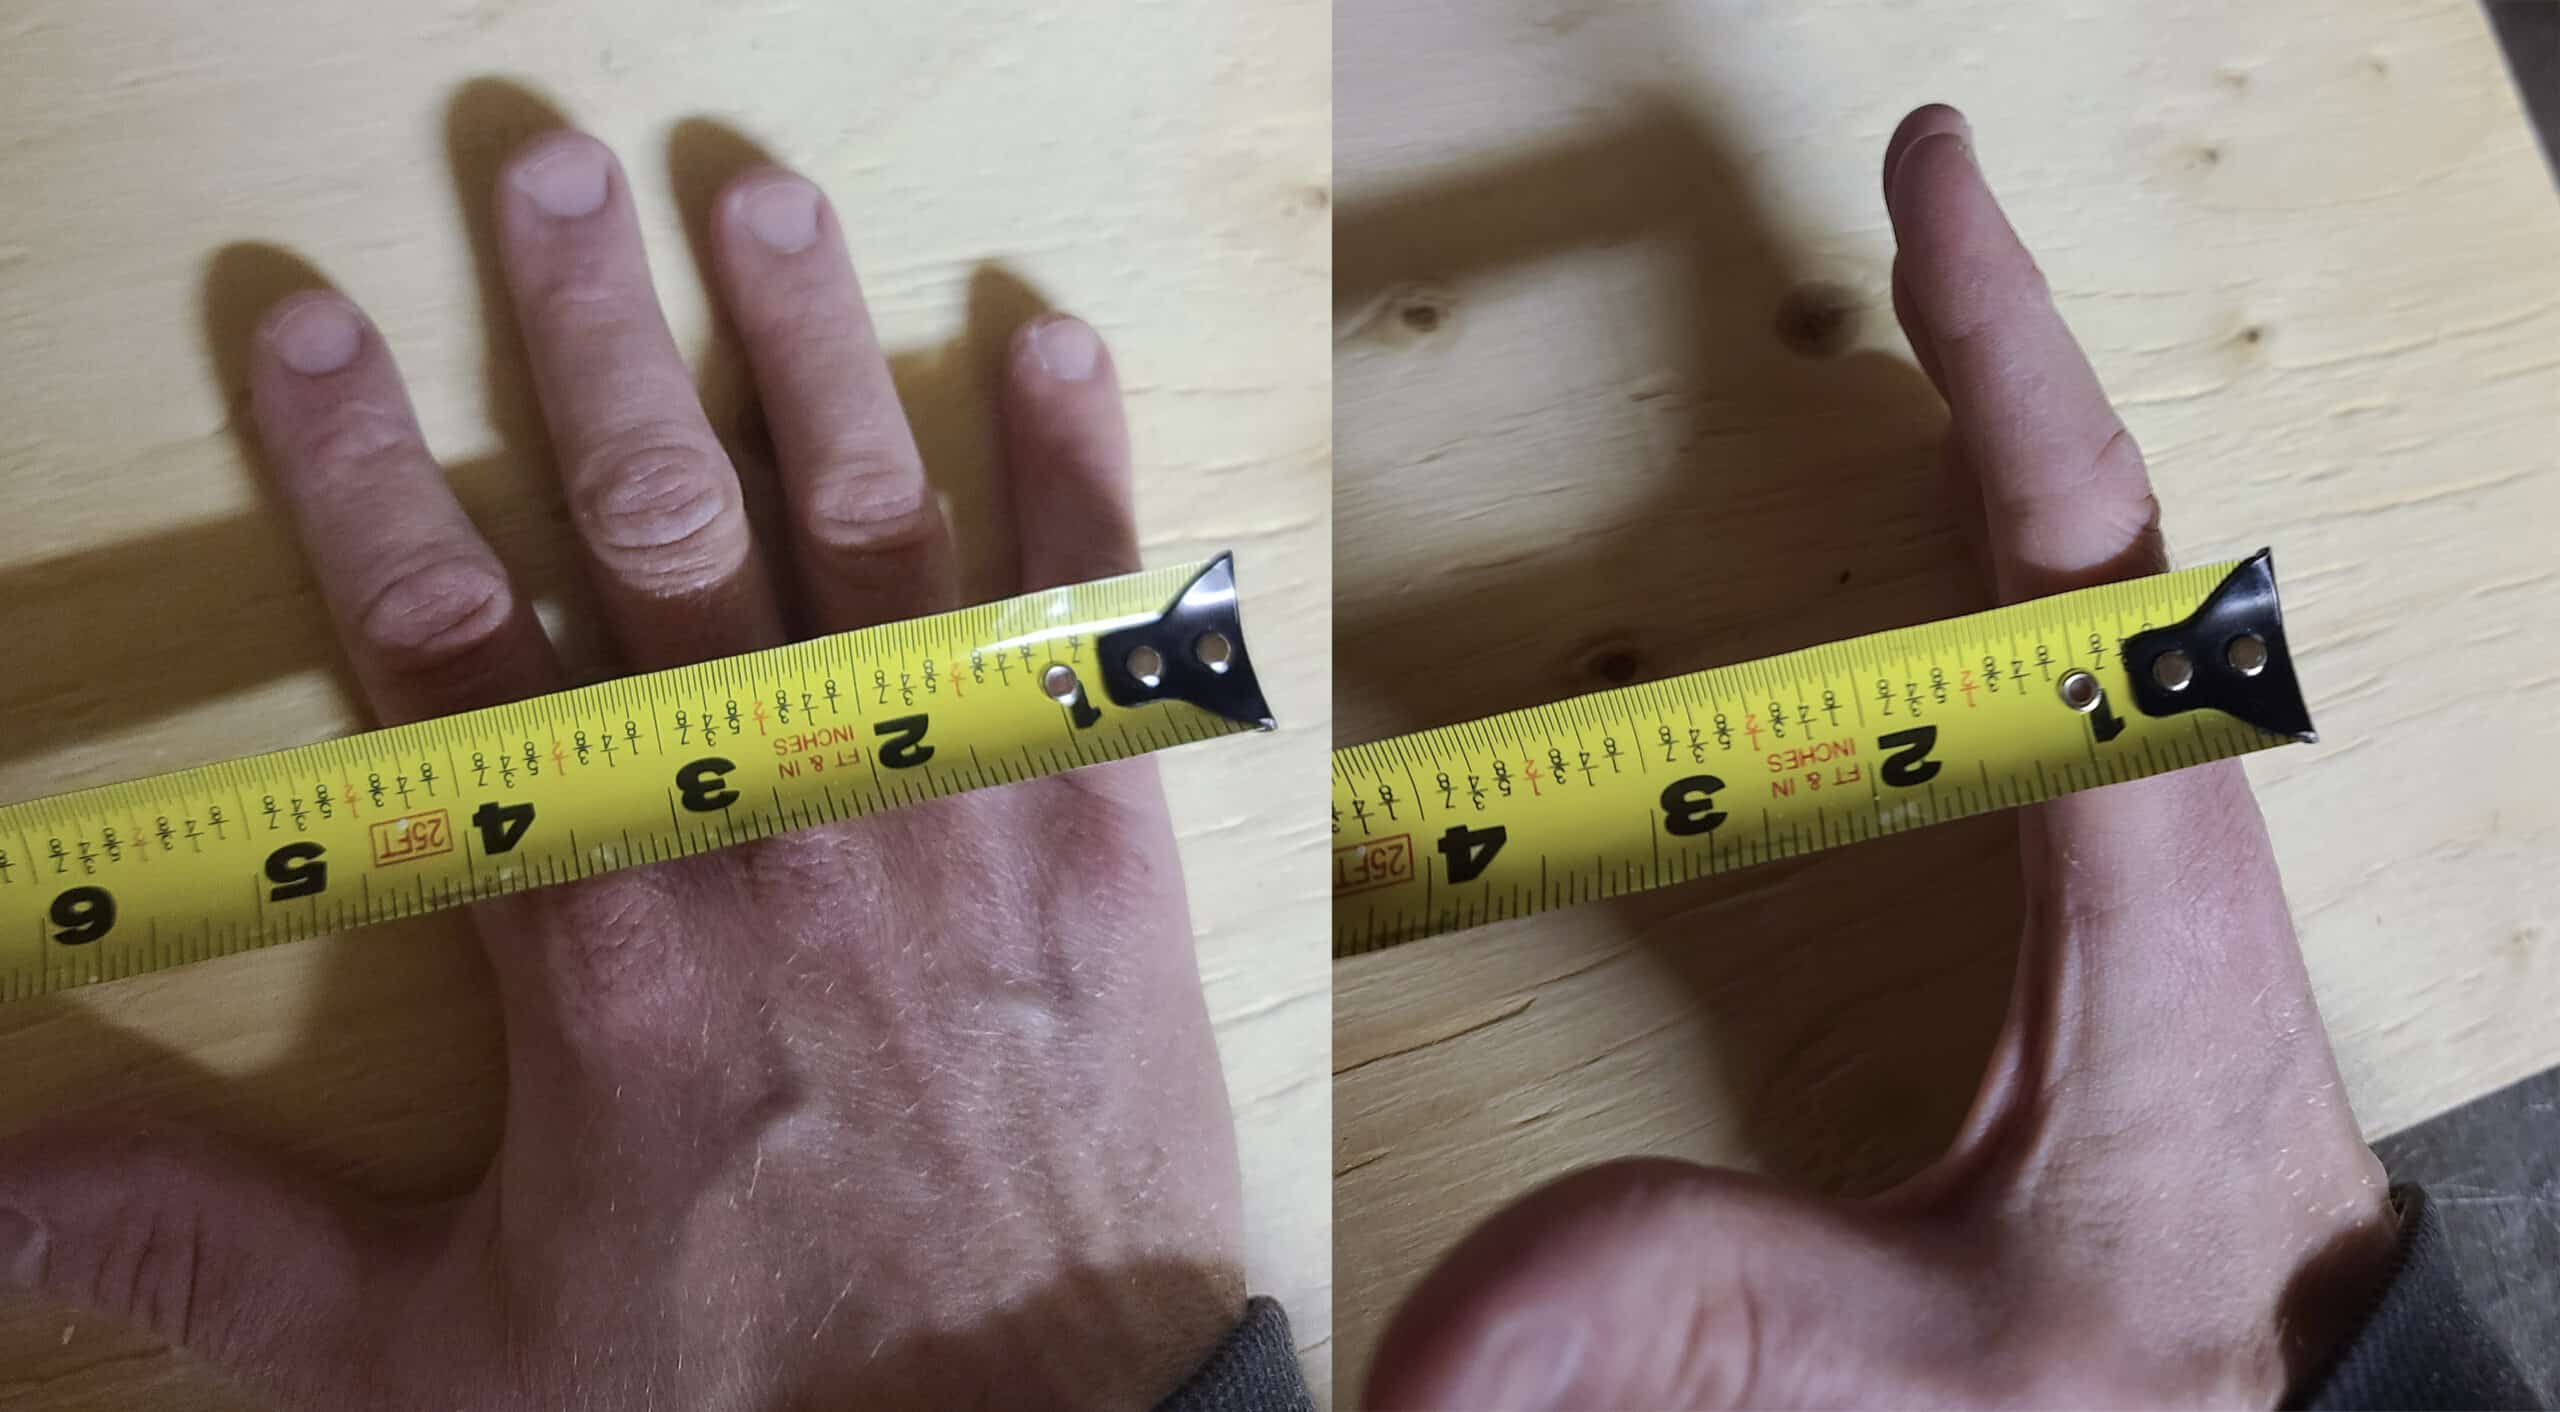 Left side, a photo of the back of a hand and a tape measure across, the hand is about 4" wide. Right side: a hand on end with a tape measure across, the hand is about 1" wide.